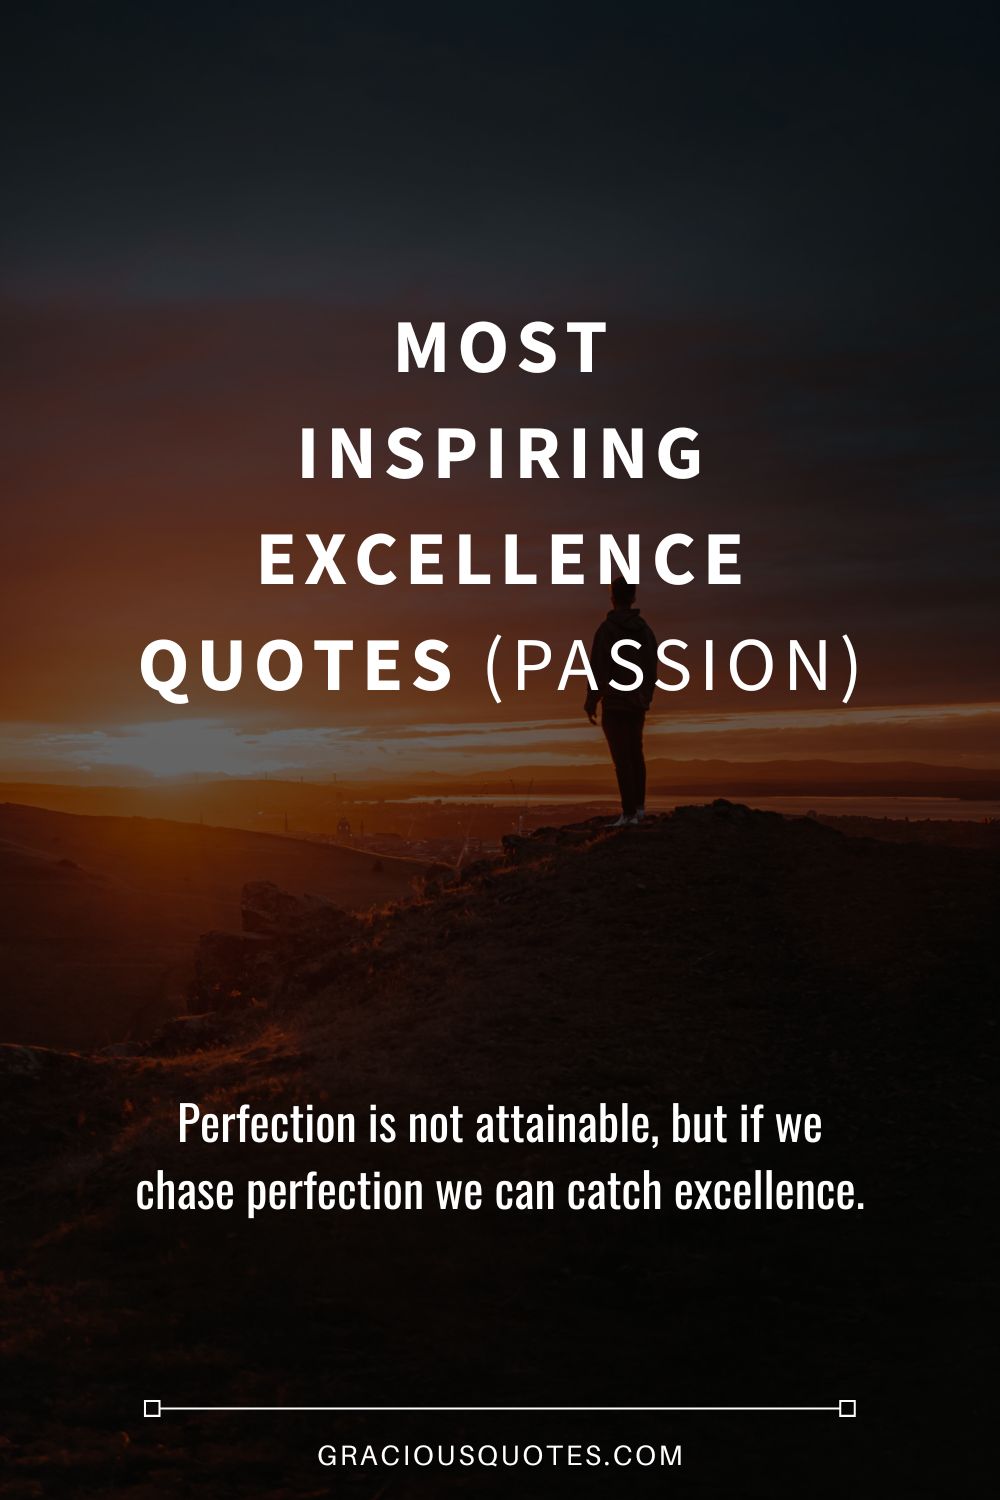 Inspirational Quotes On Excellence